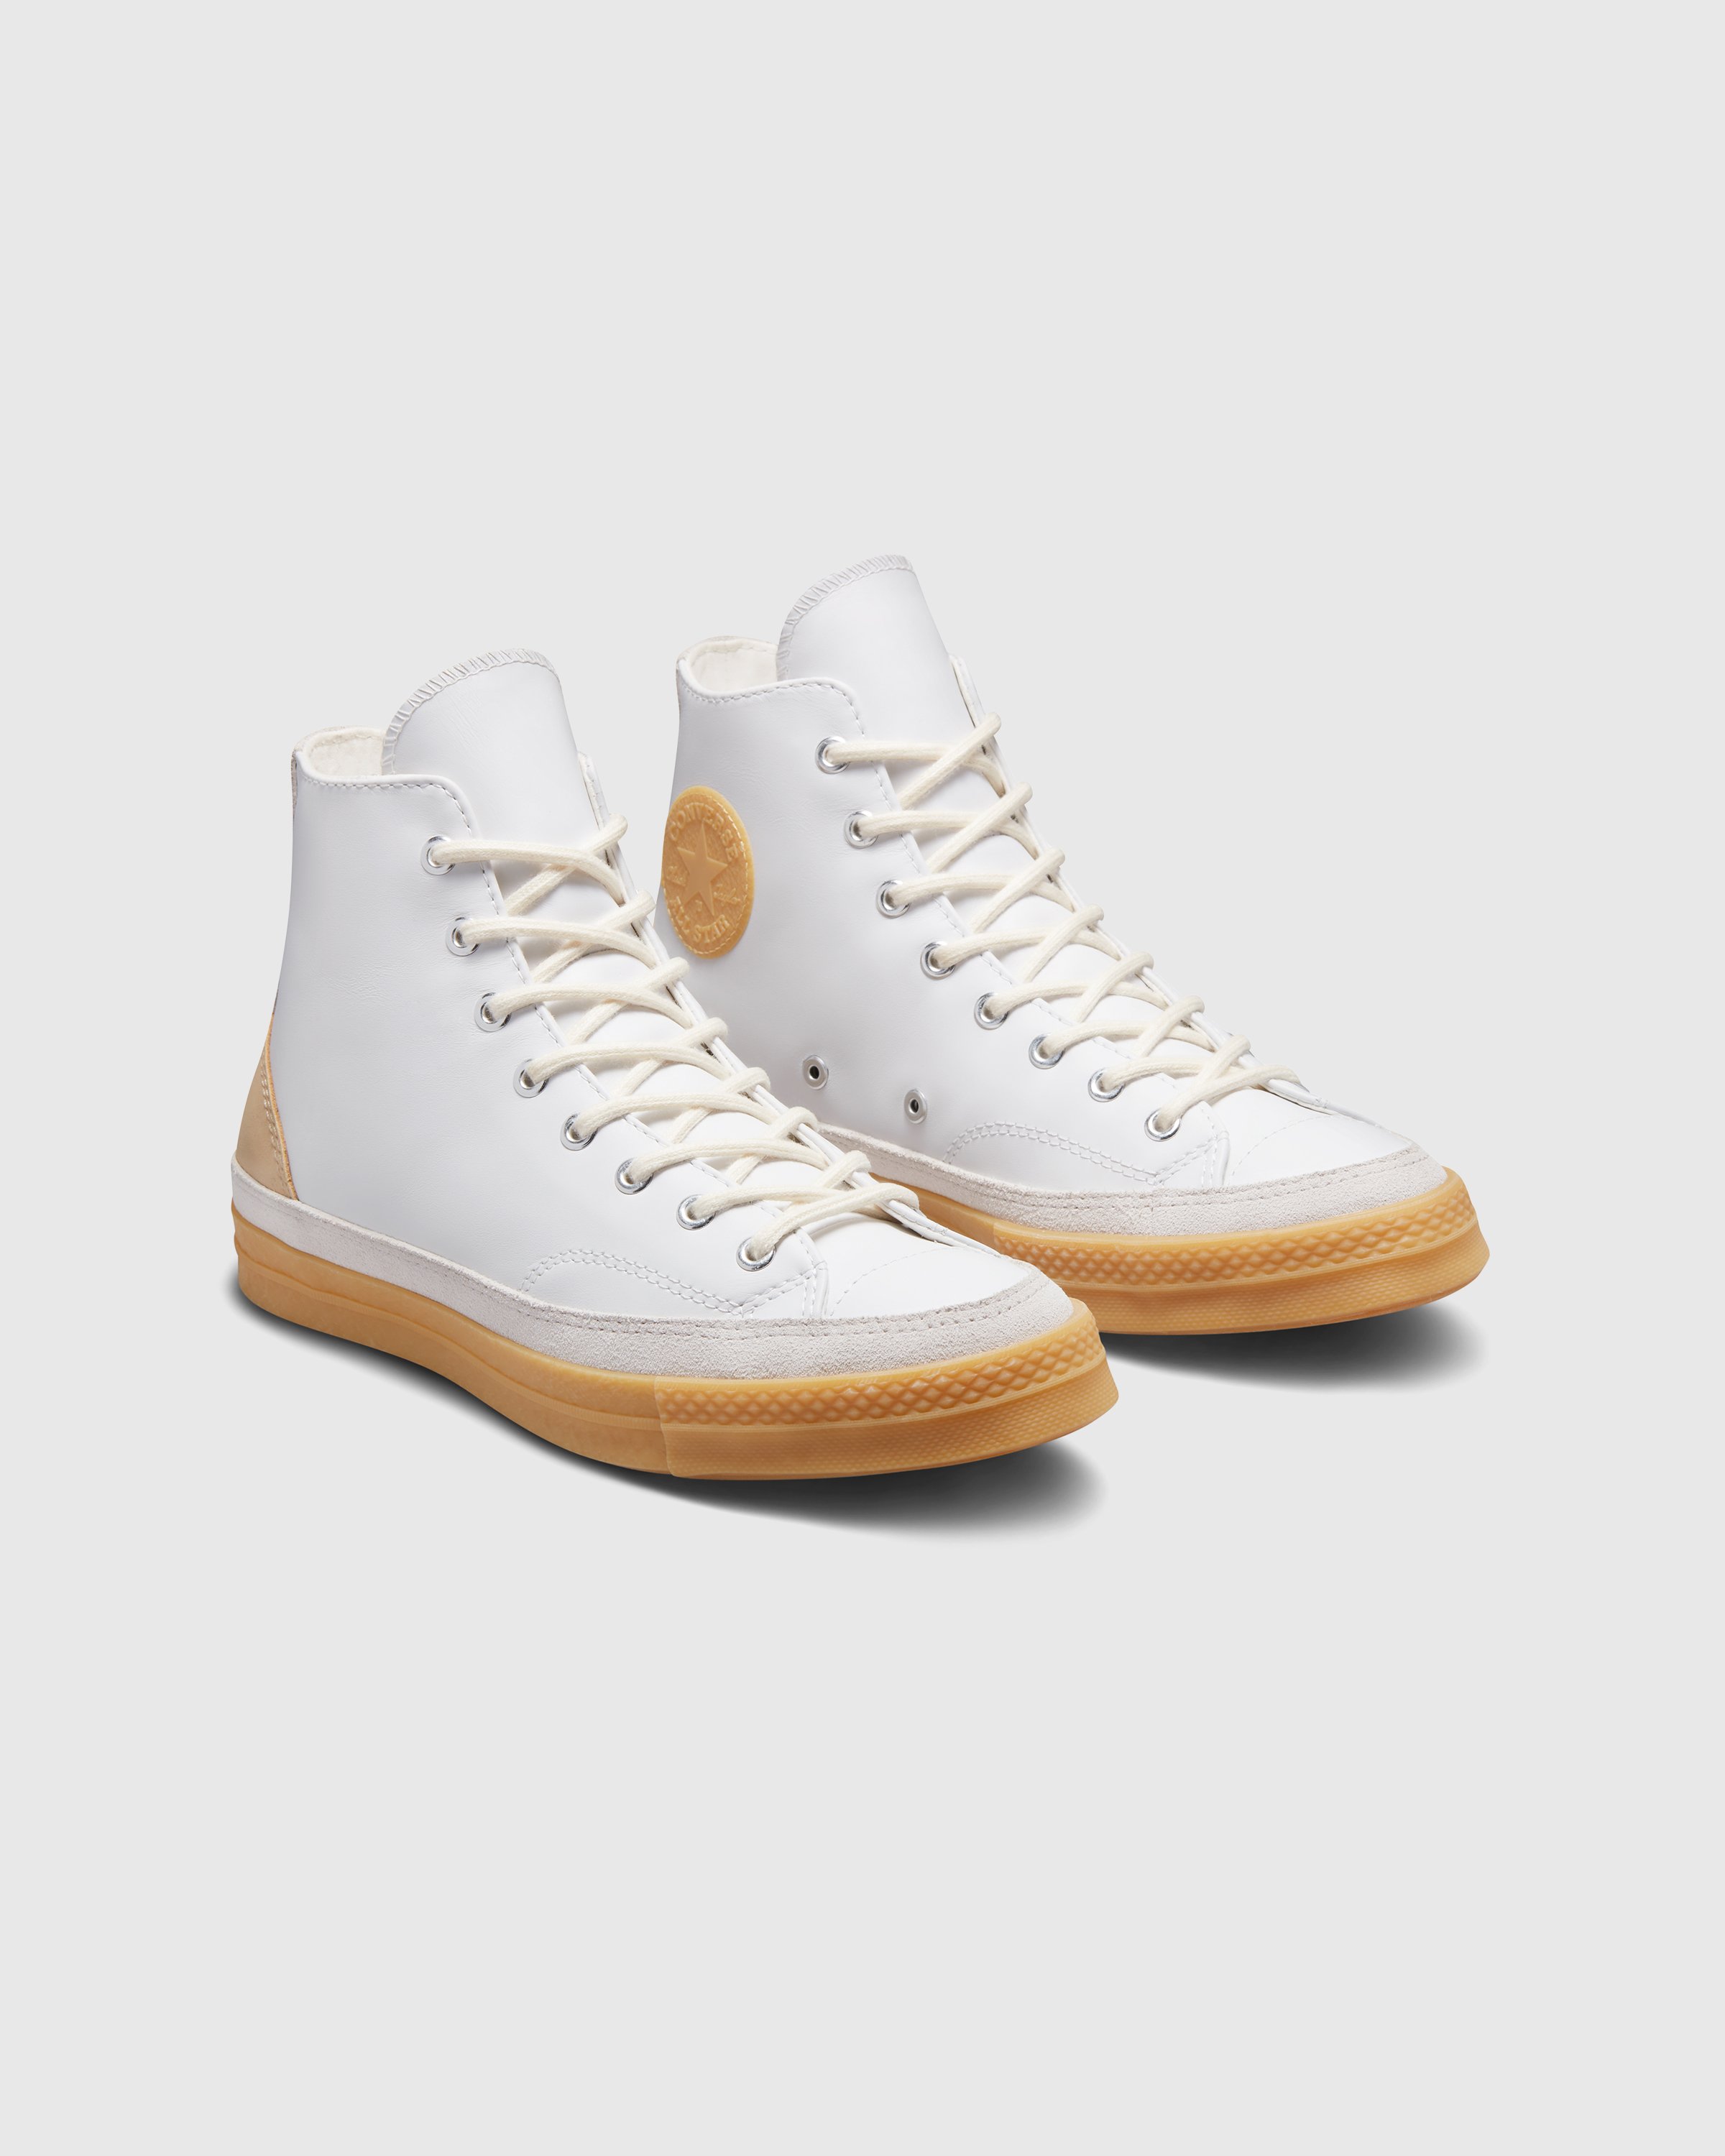 Converse - Chuck 70 Hi South of Houston White/Sunlight/Pale Putty - Footwear - White - Image 3